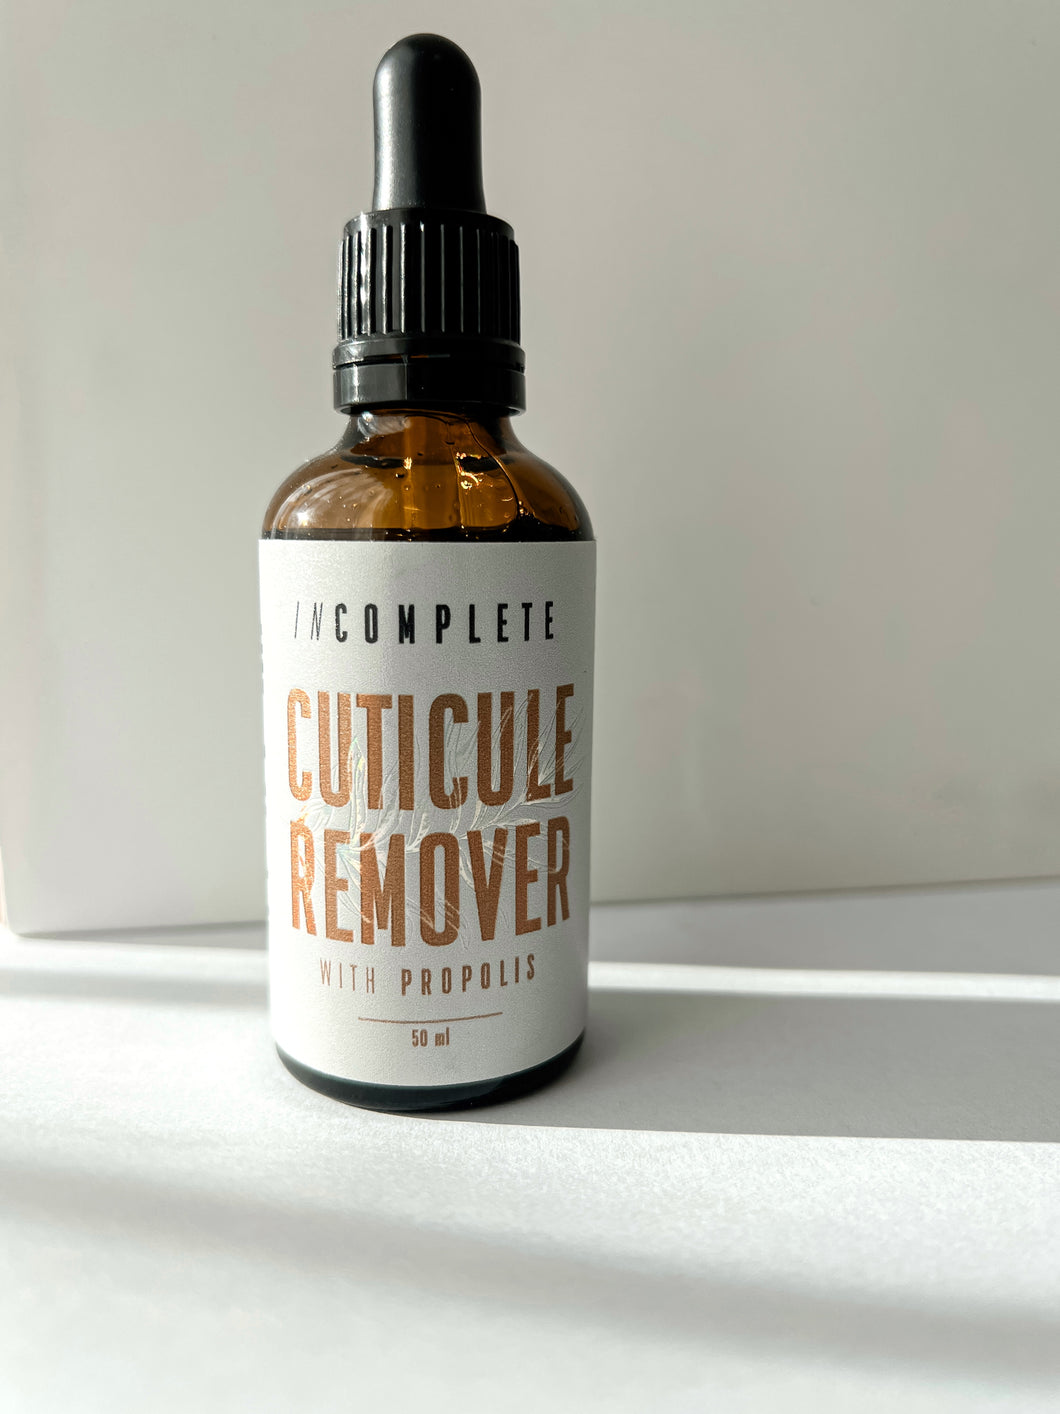 In Complete cuticle remover with propolis